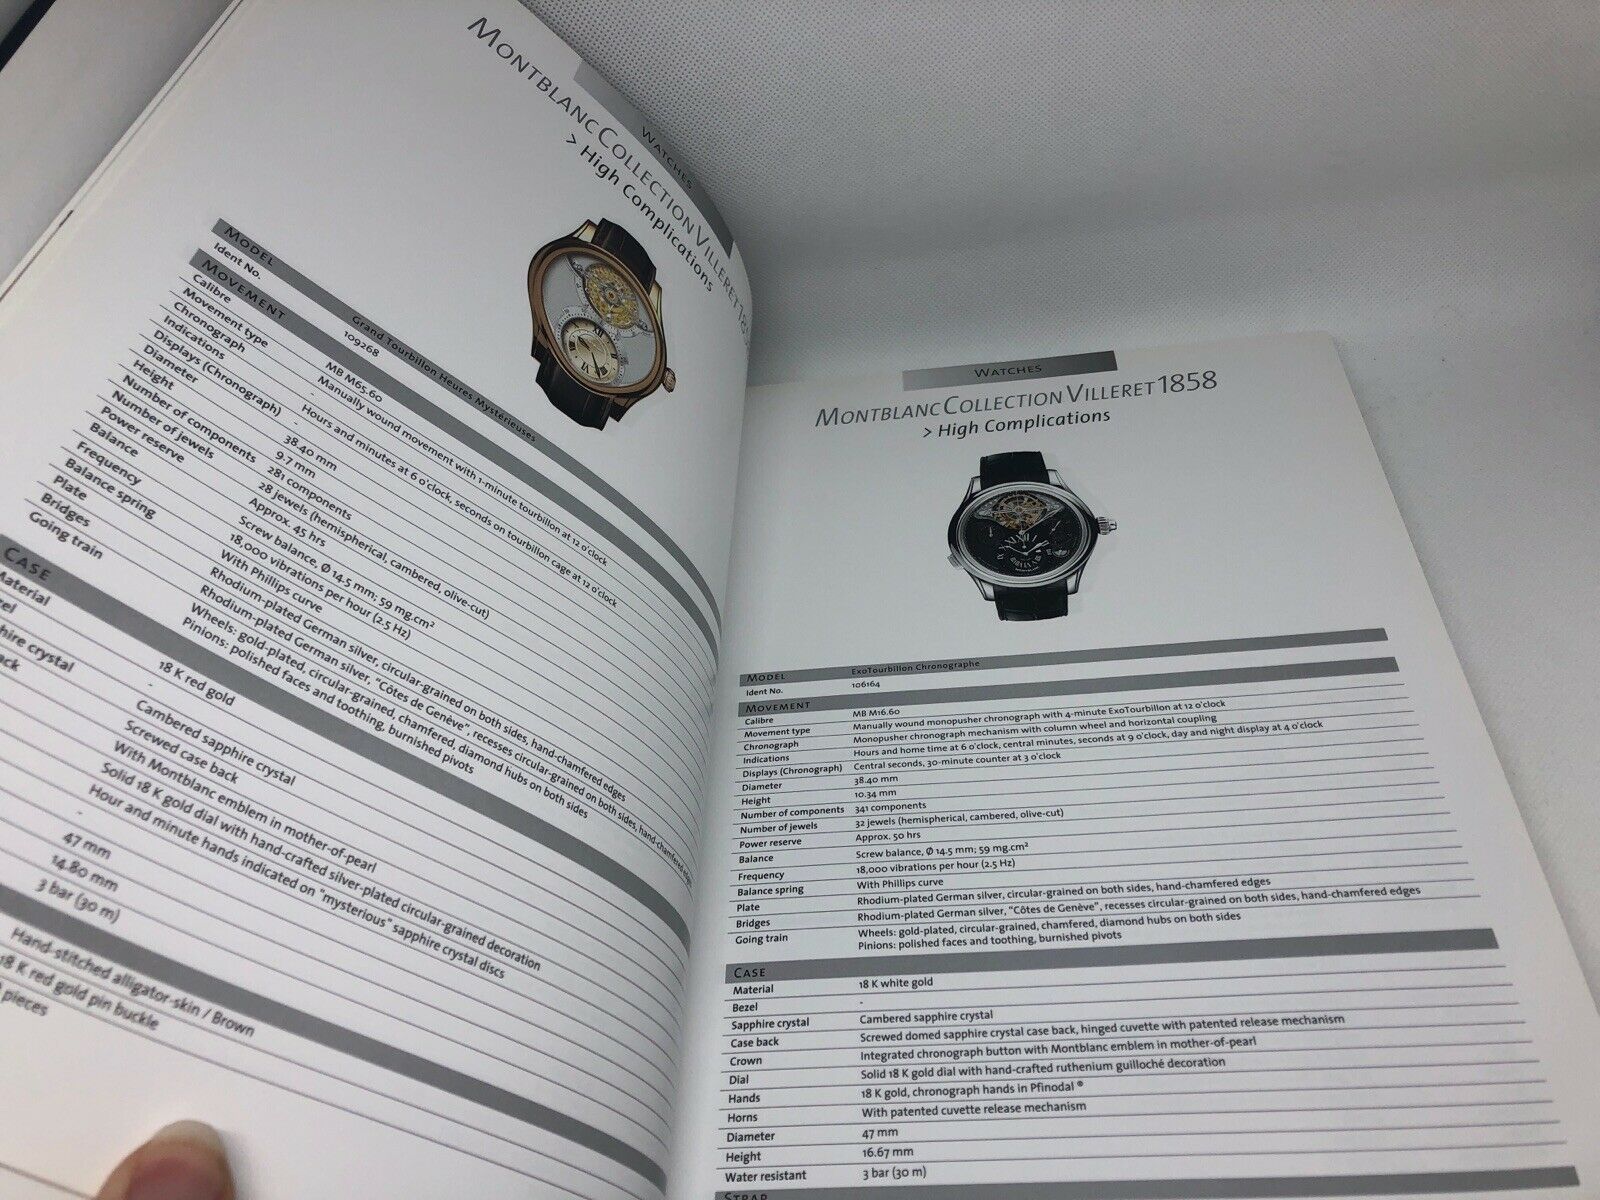 Montblanc Watch Book Hardcover Catalog 2013 2014